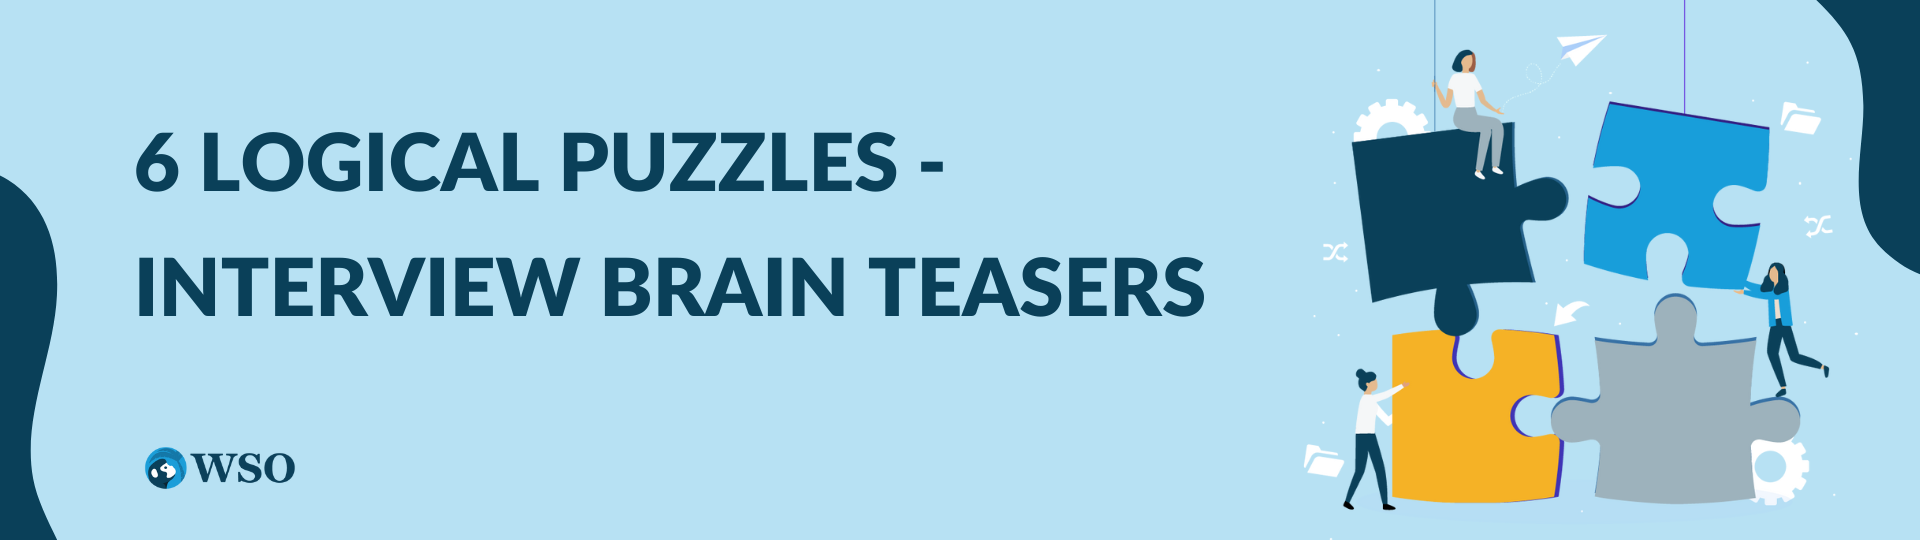 6 Logical Puzzles - Interview Brain Teasers